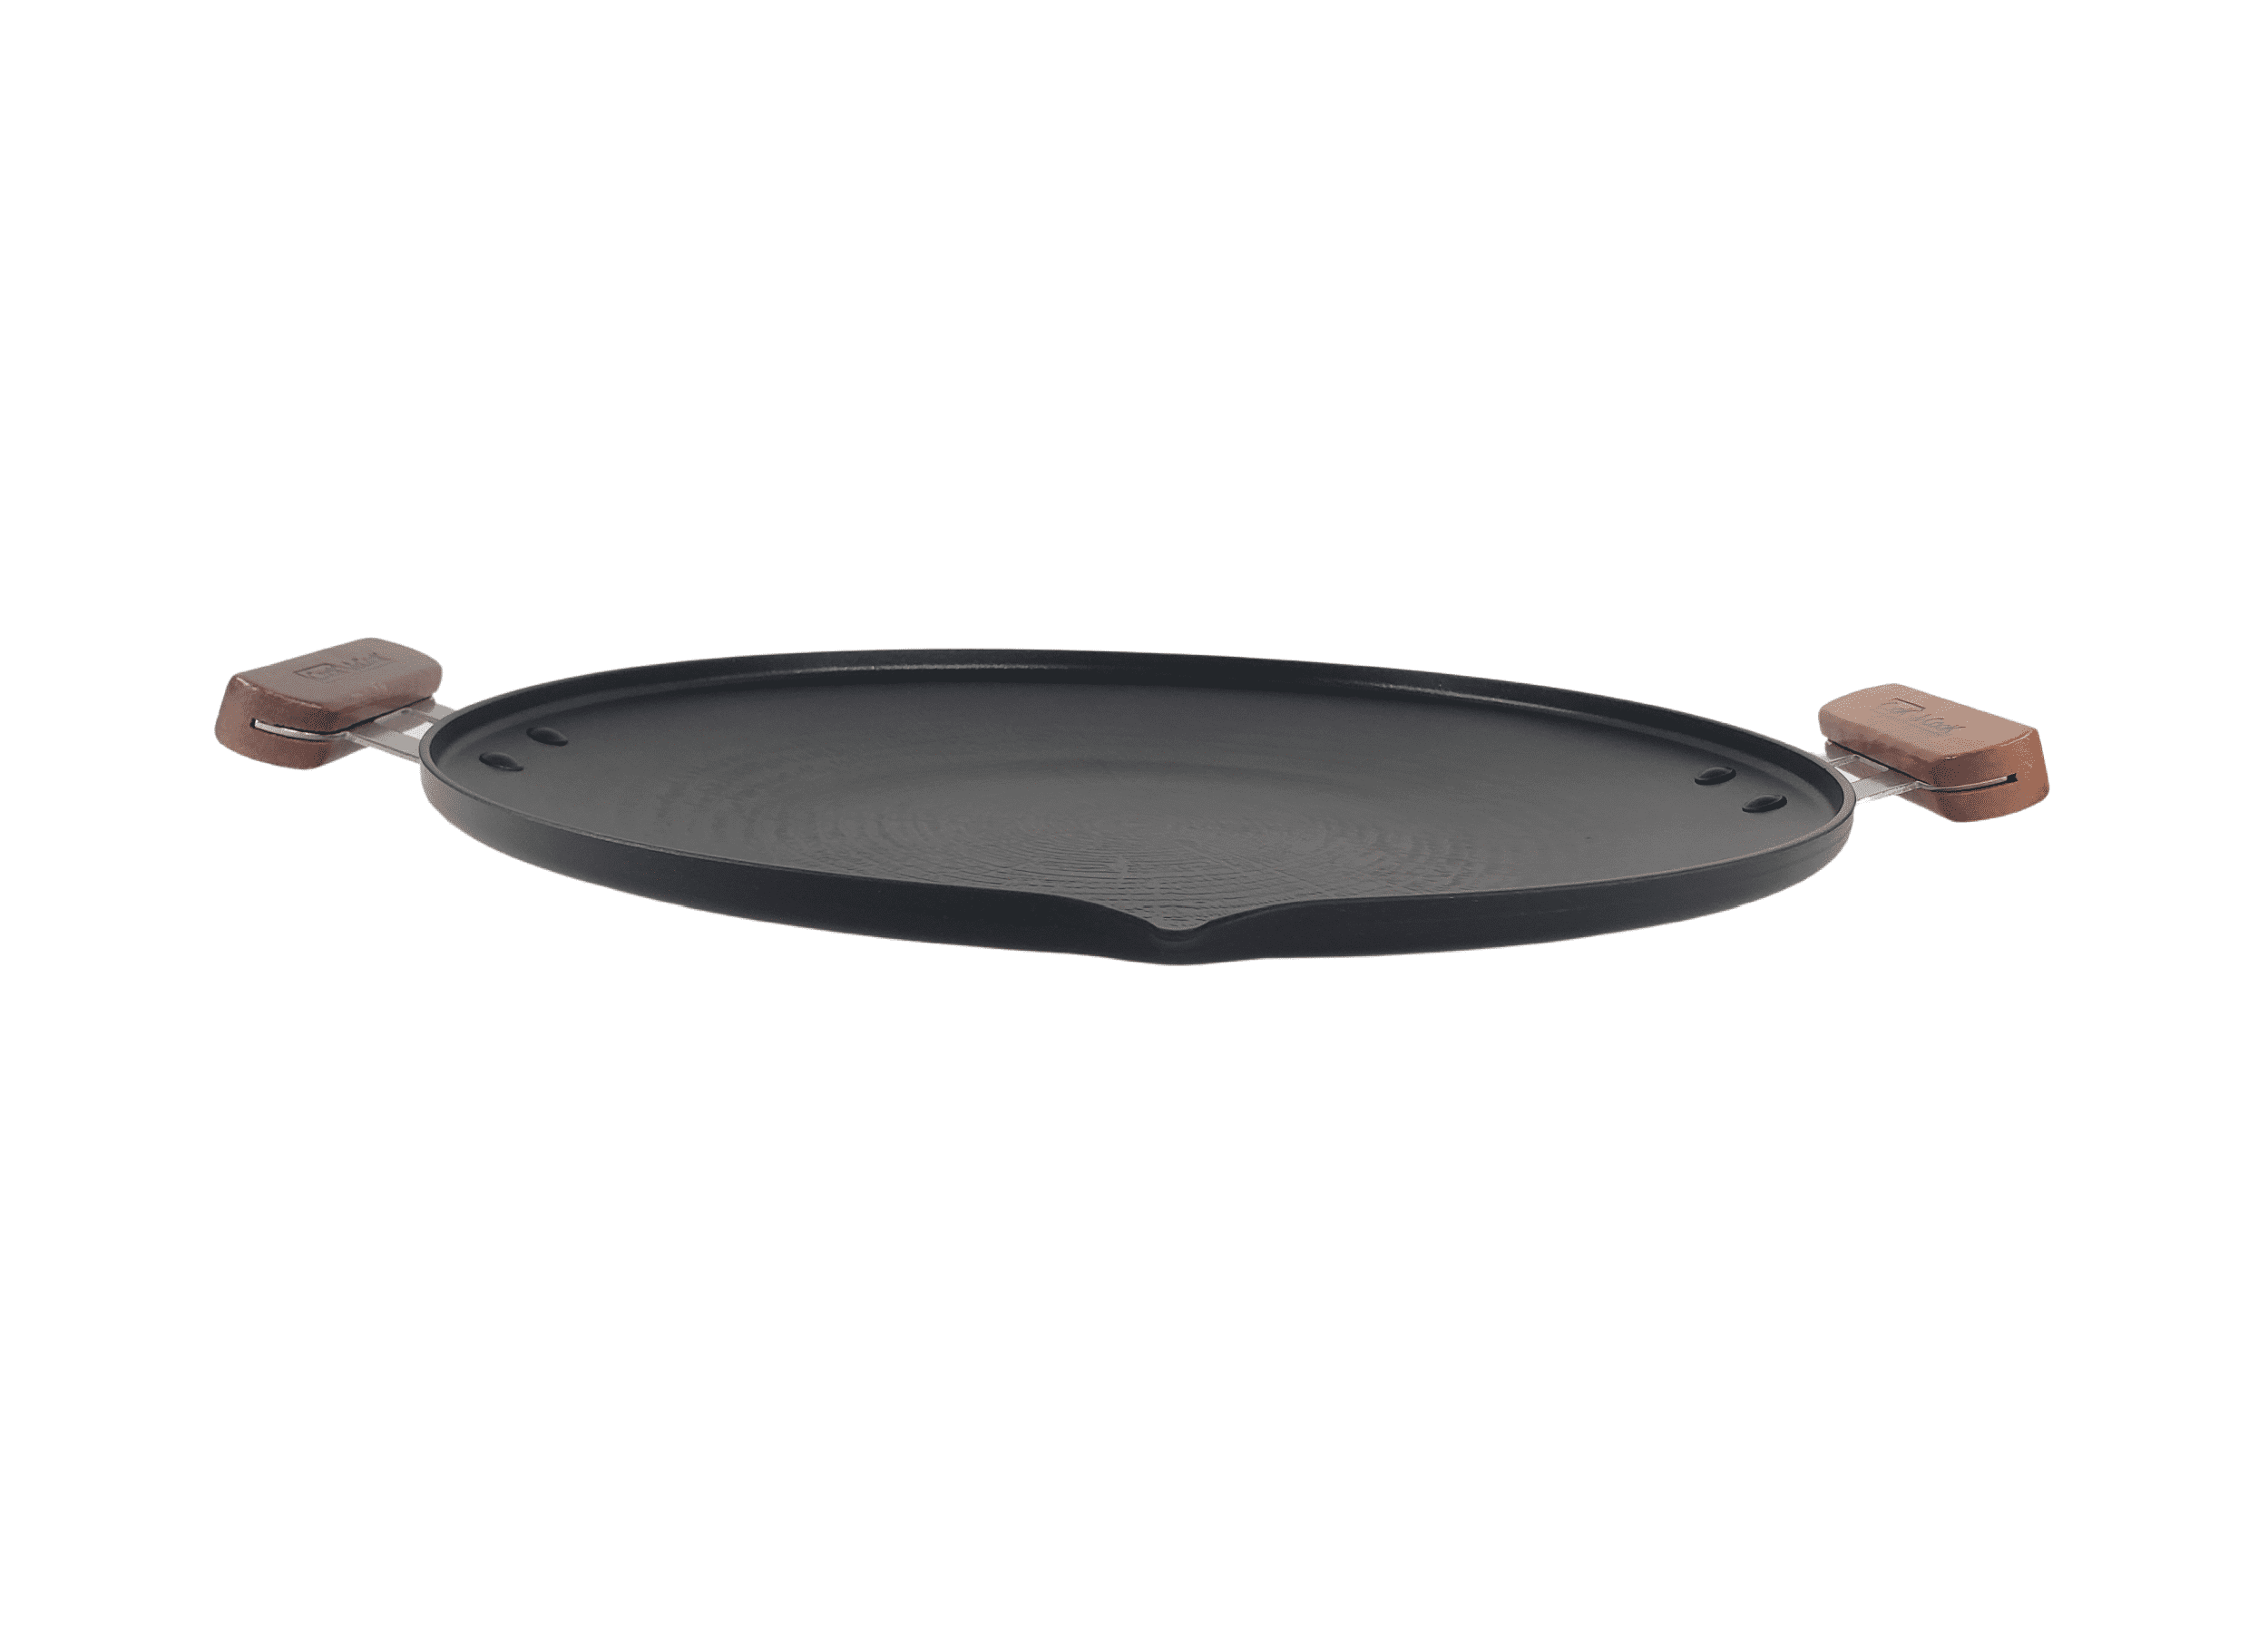 Abenaki Partition Griddle 33cm Induction Combined Camping Grill Pan